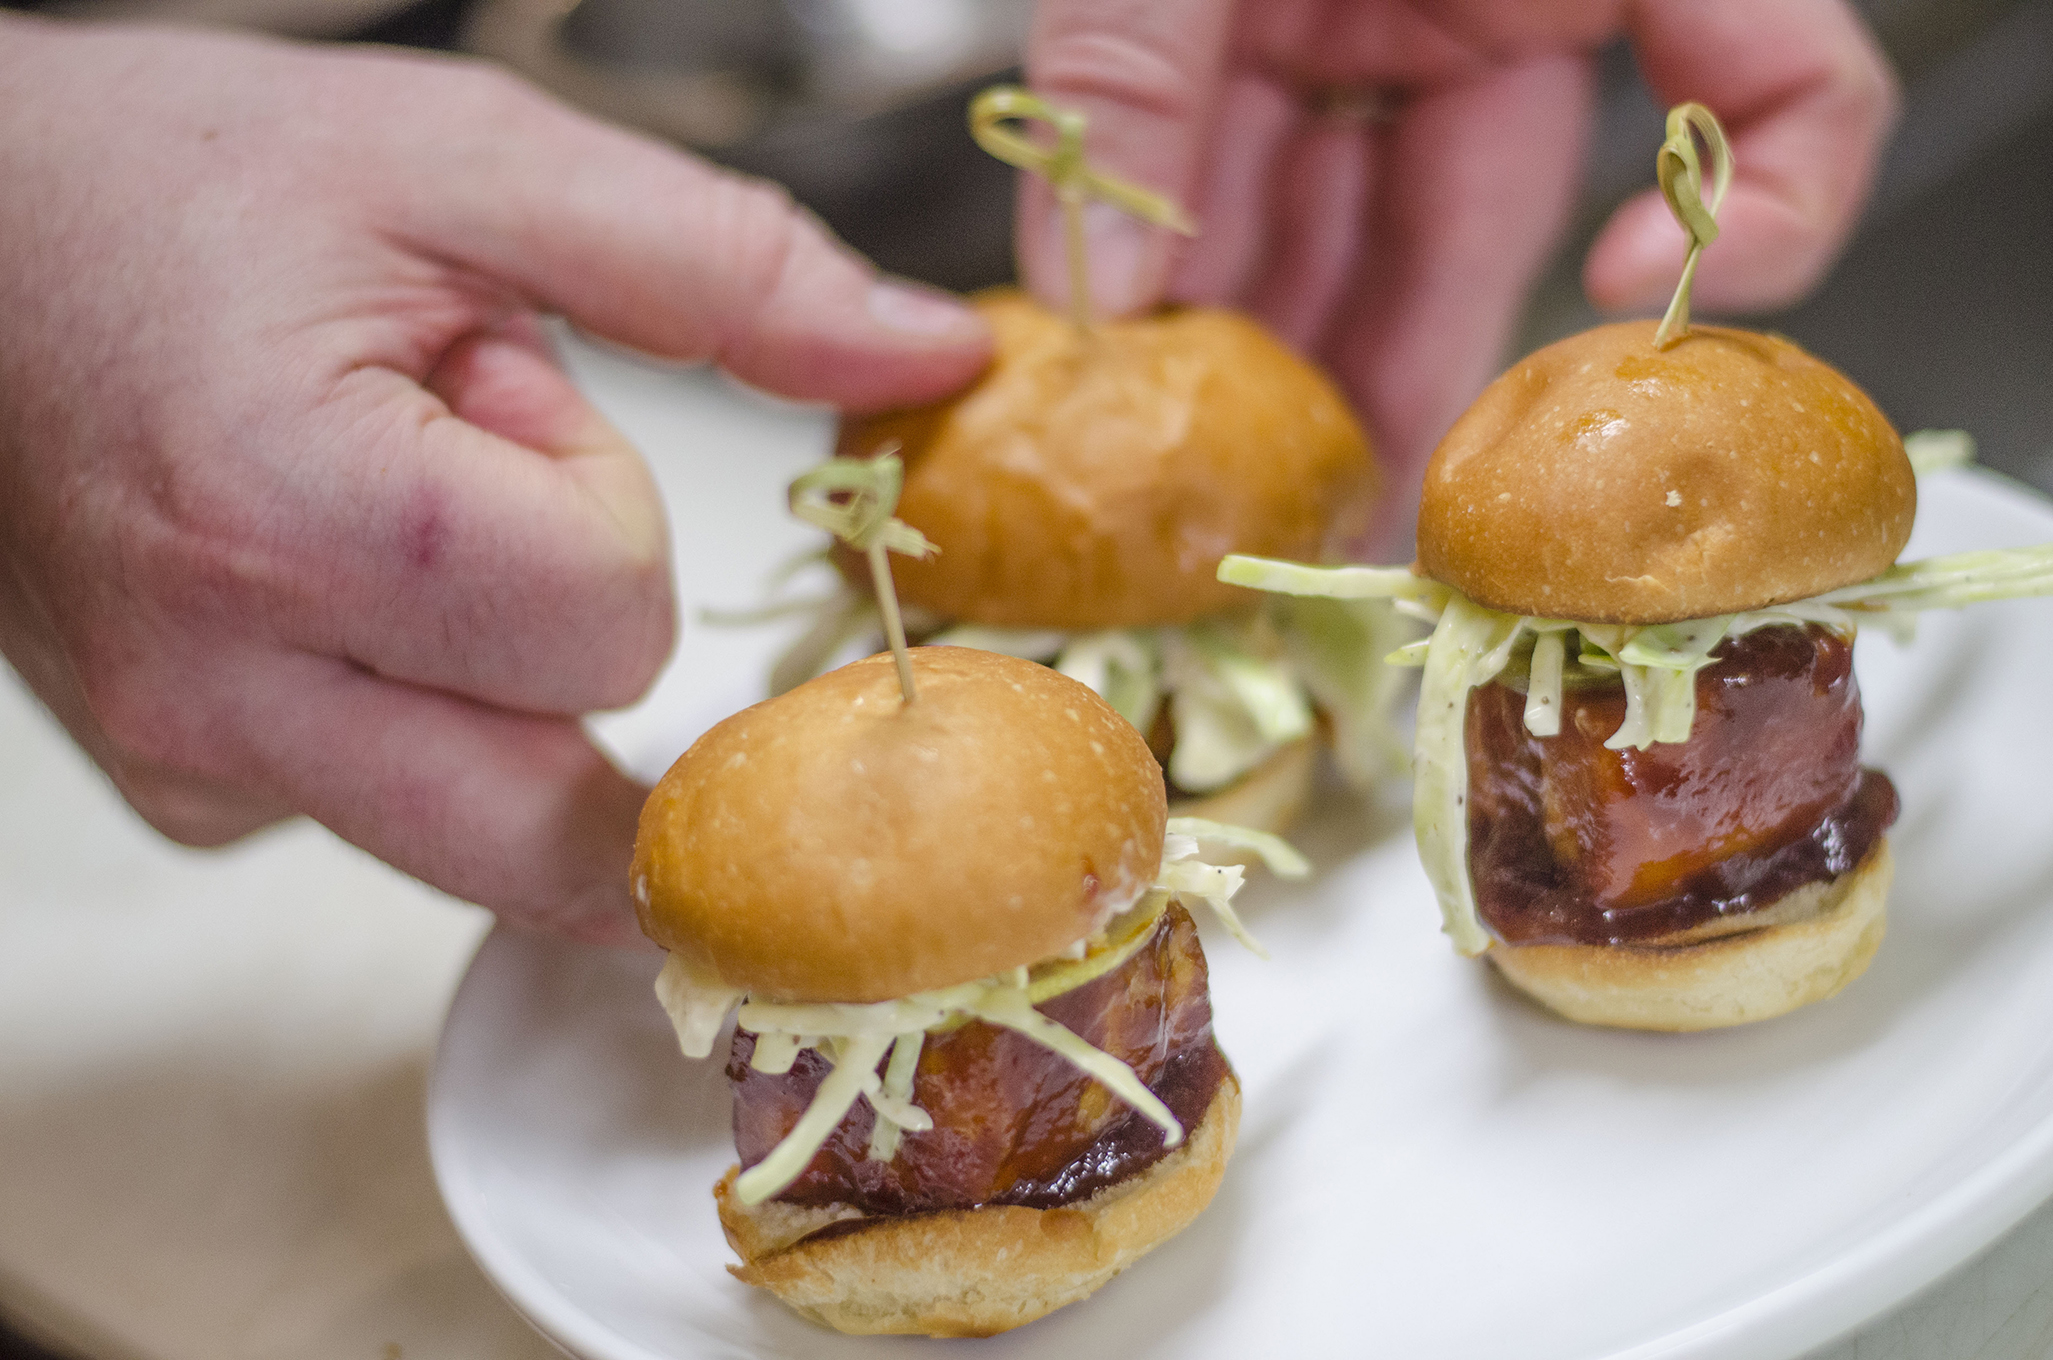 Barbeque pork belly sandwiches from Vine + Ash in Tecumseh, Ontario.